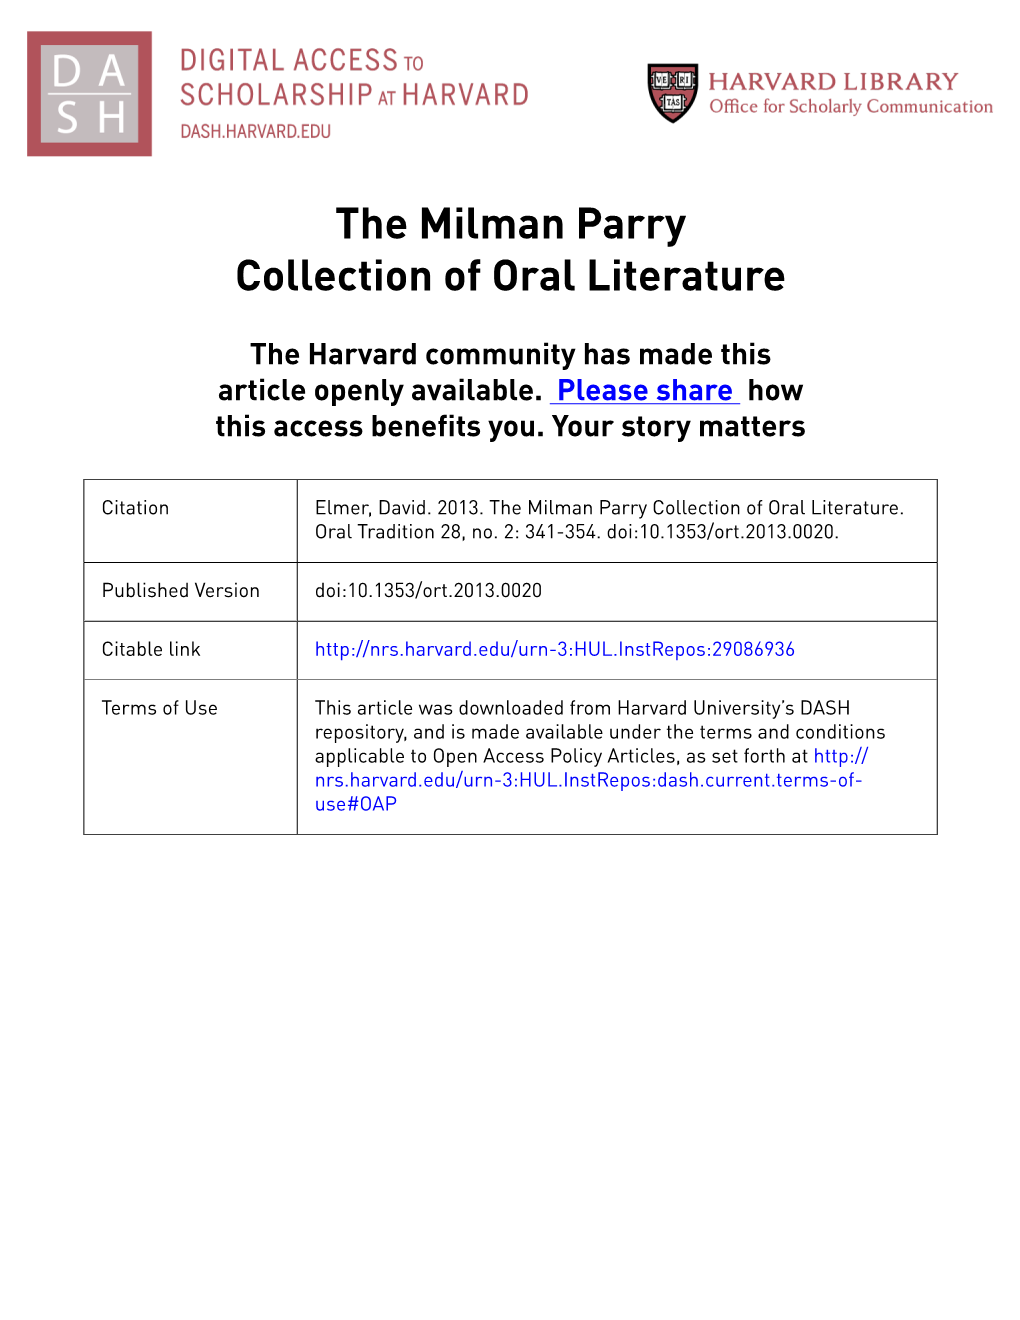 The Milman Parry Collection of Oral Literature